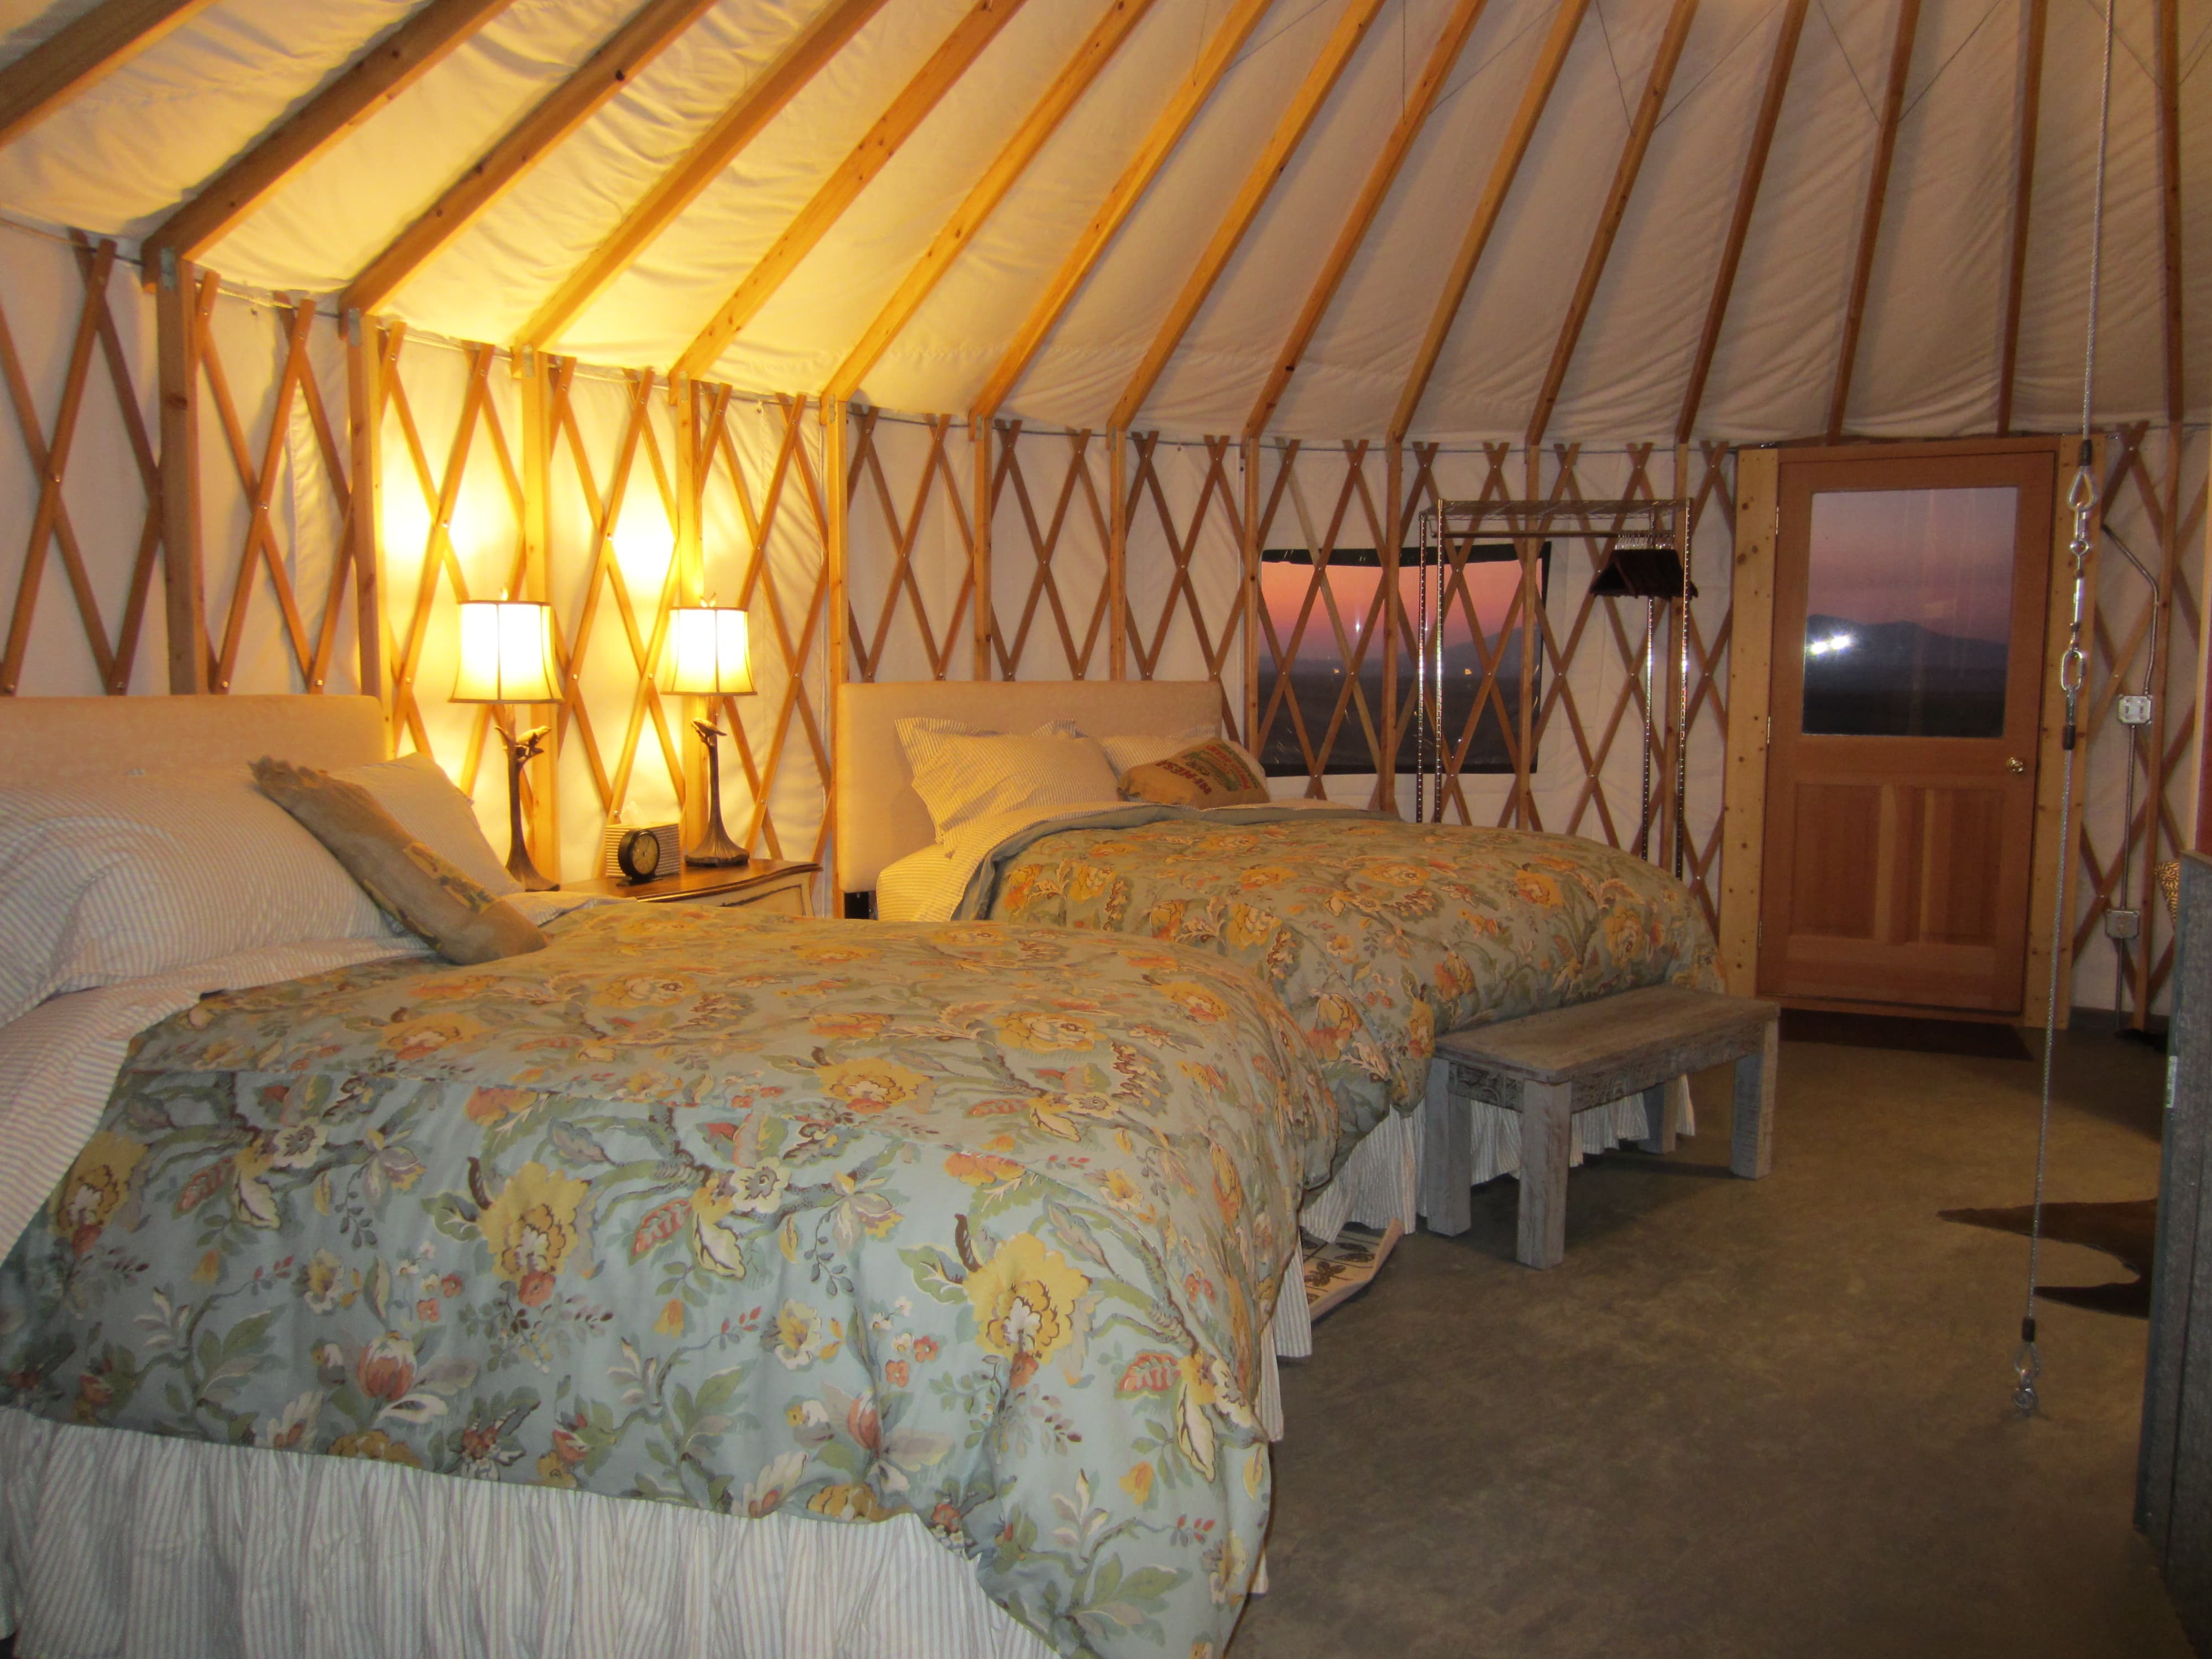 2 beds in a yurt